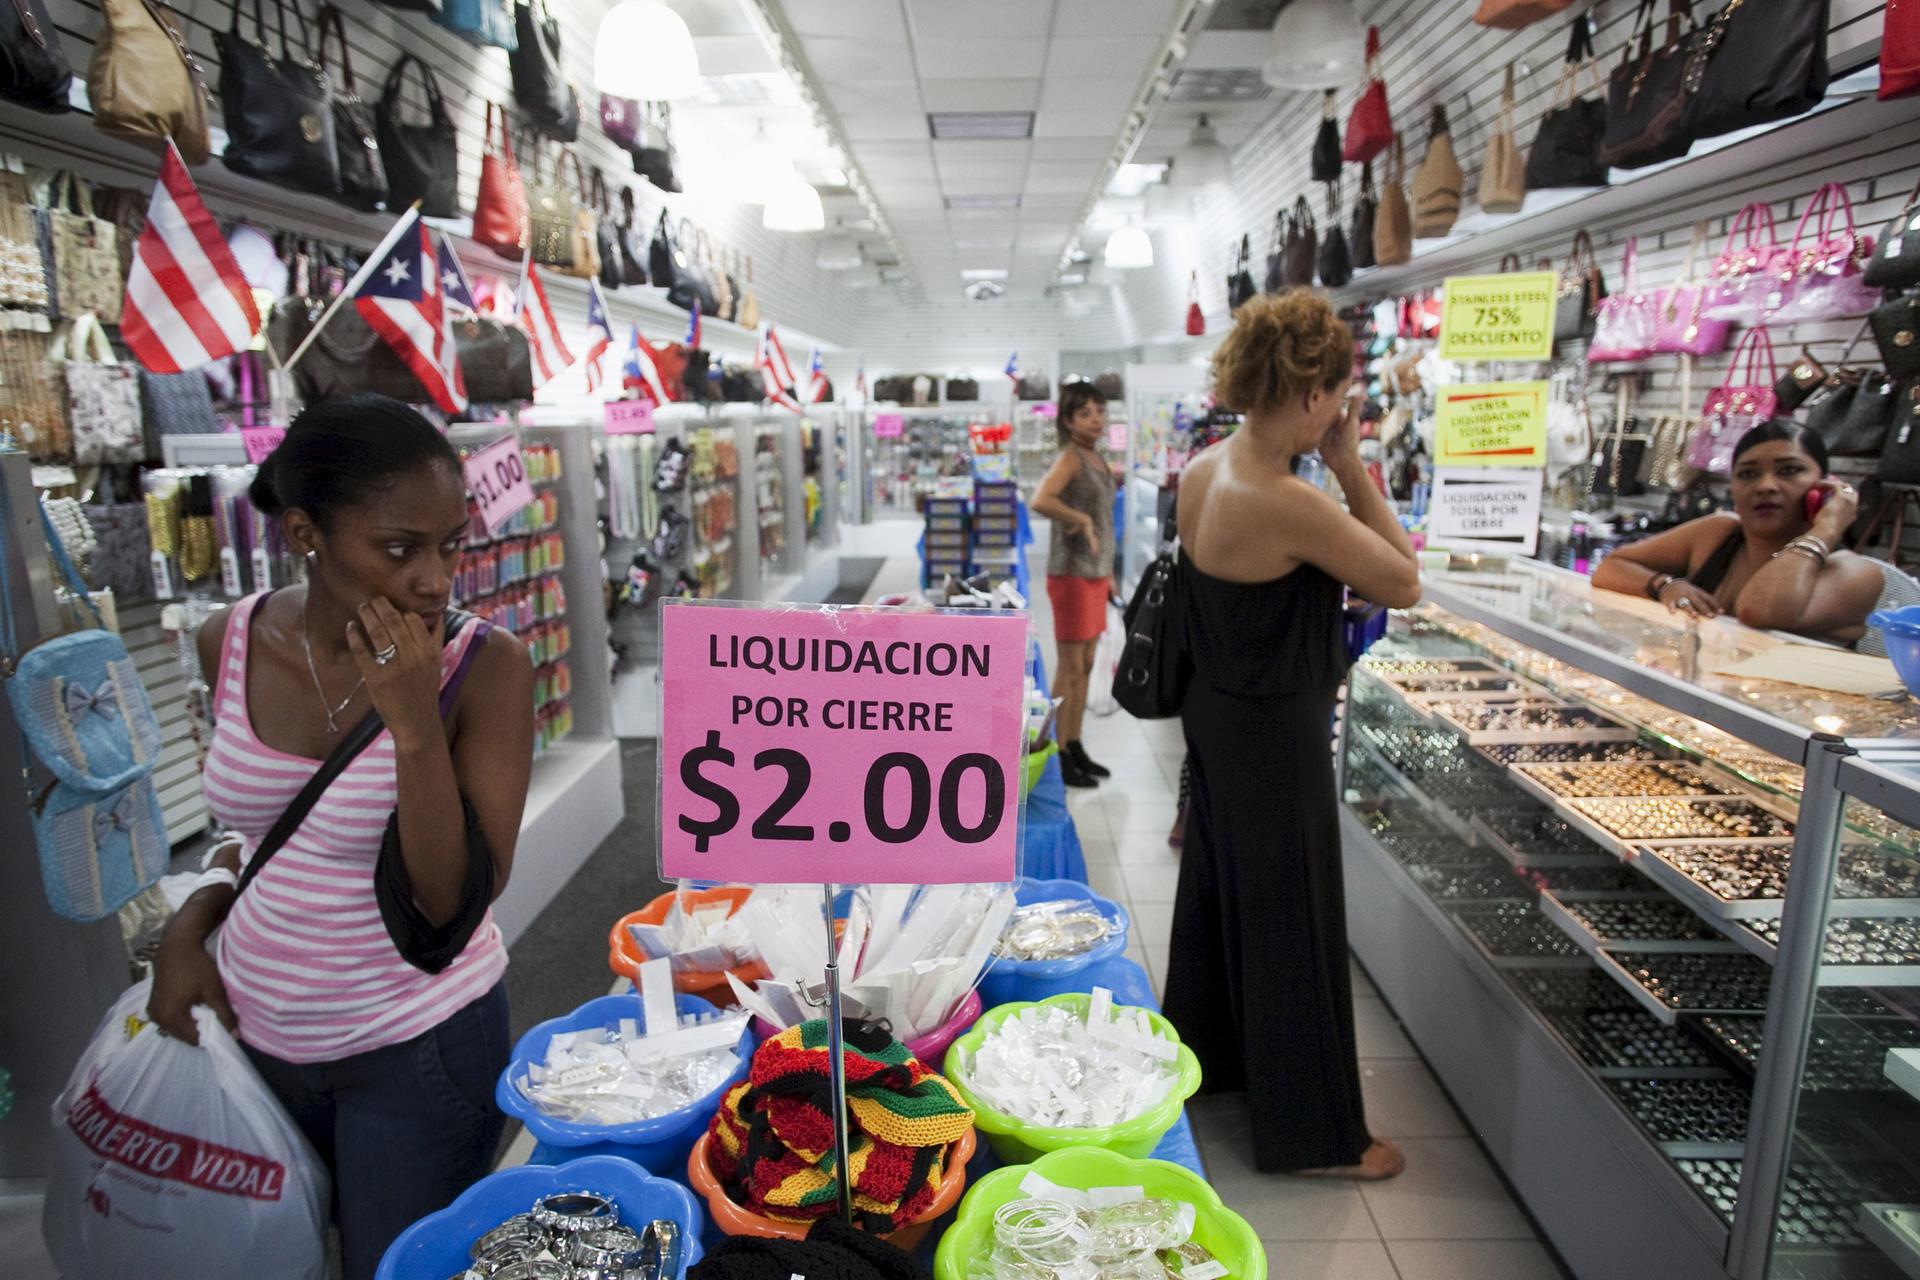 People shop in a store in San Juan, Puerto Rico, August 3, 2015.